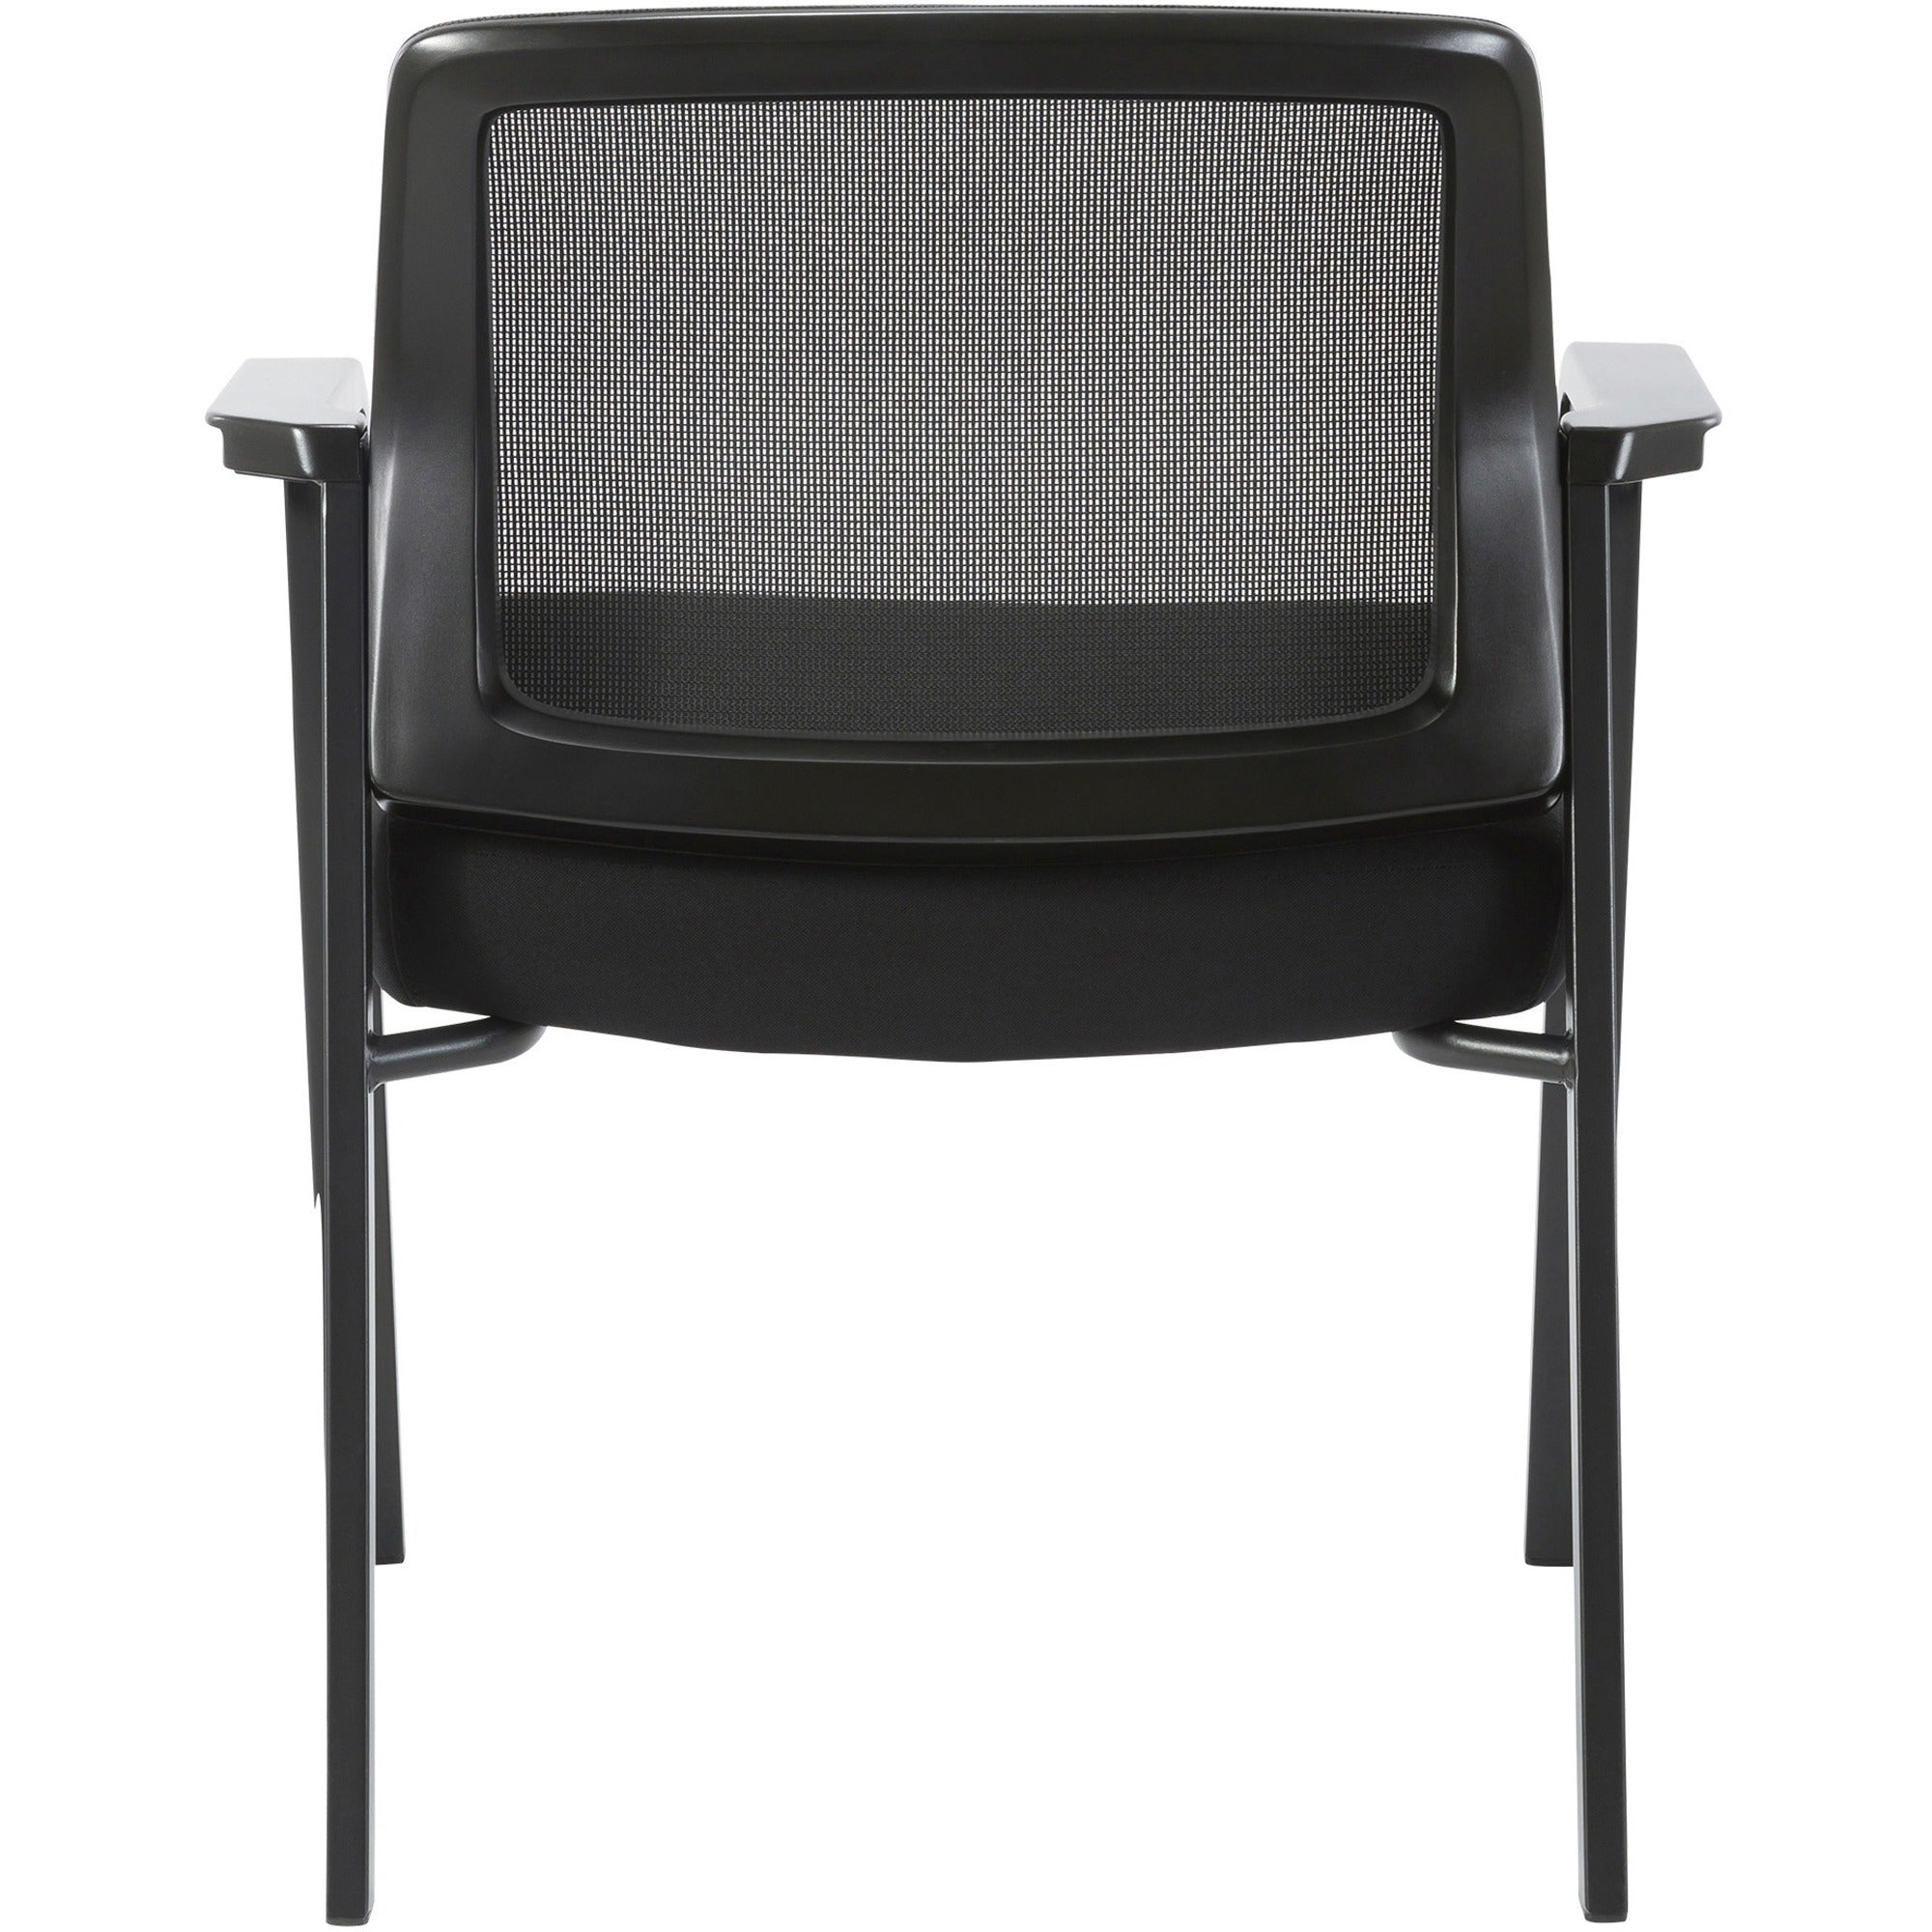 lorell-big-&-tall-mesh-low-back-guest-chair-fabric-seat-mesh-back-steel-frame-low-back-black-1-each_llr67003 - 4